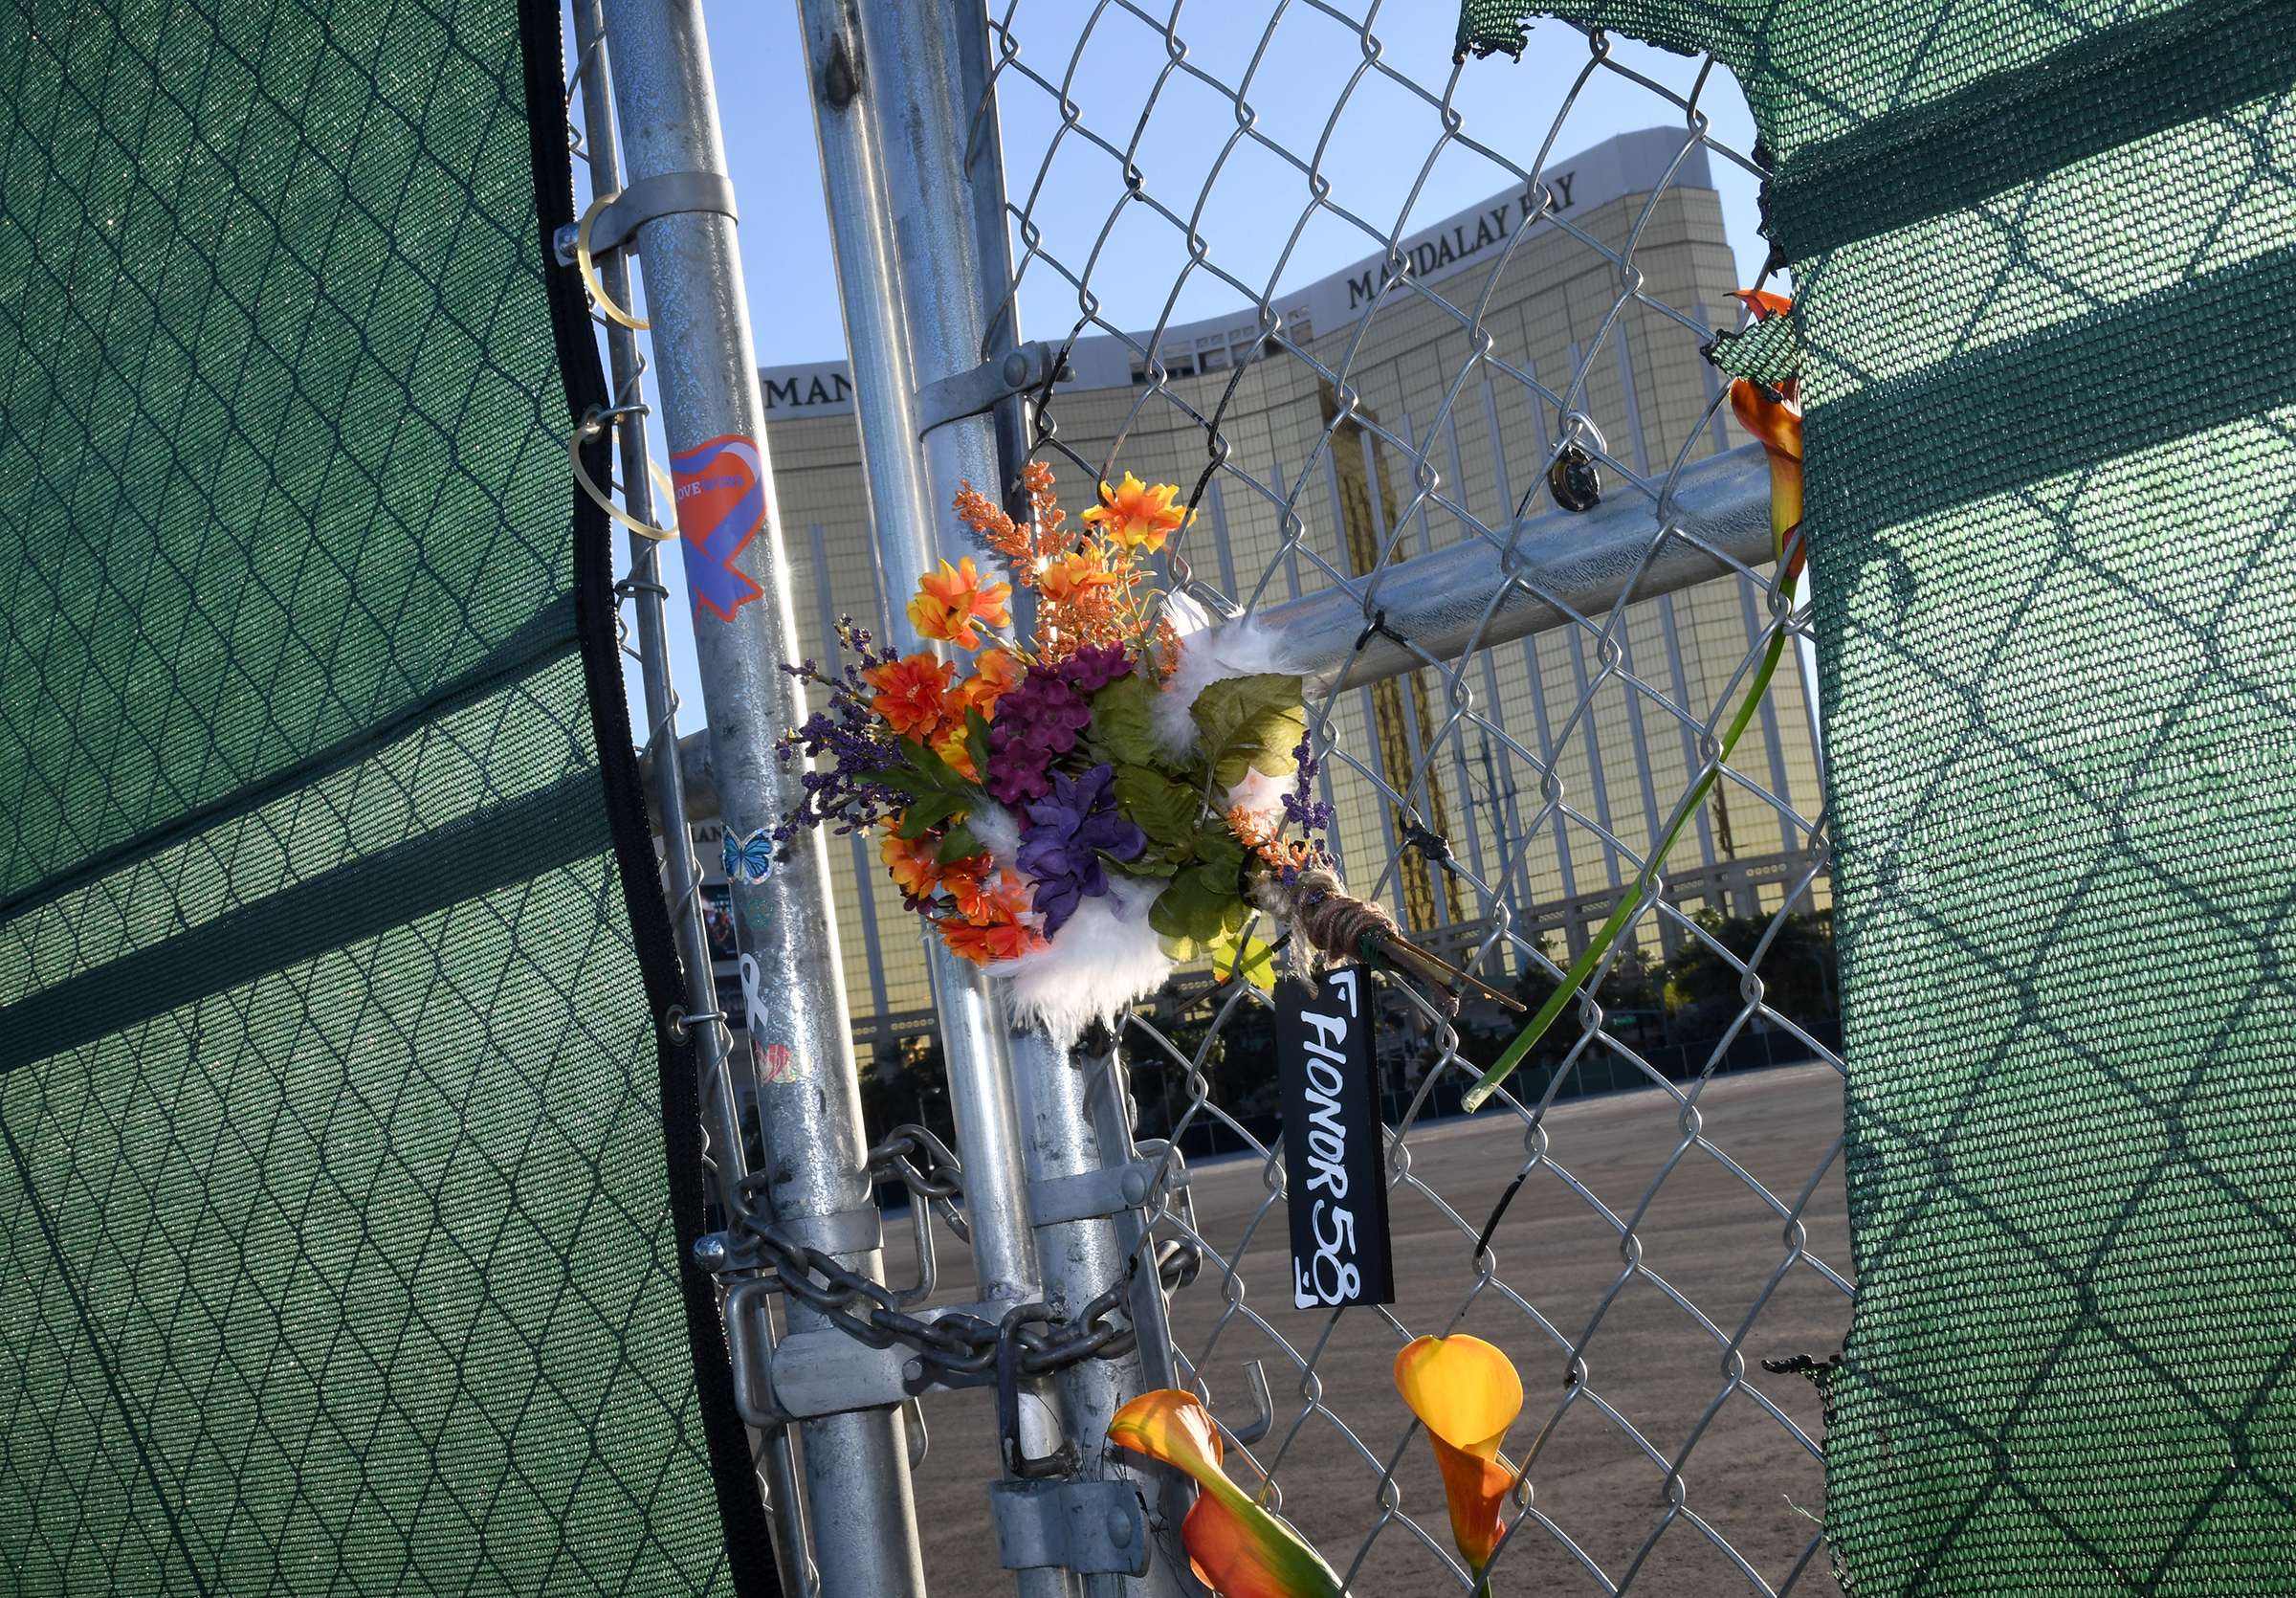 Flowers and a sign hang on a fence across from Mandalay Bay Resort and Casino as a tribute to those killed almost two years ago in a massacre at the site on Sept. 30, 2019 in Las Vegas